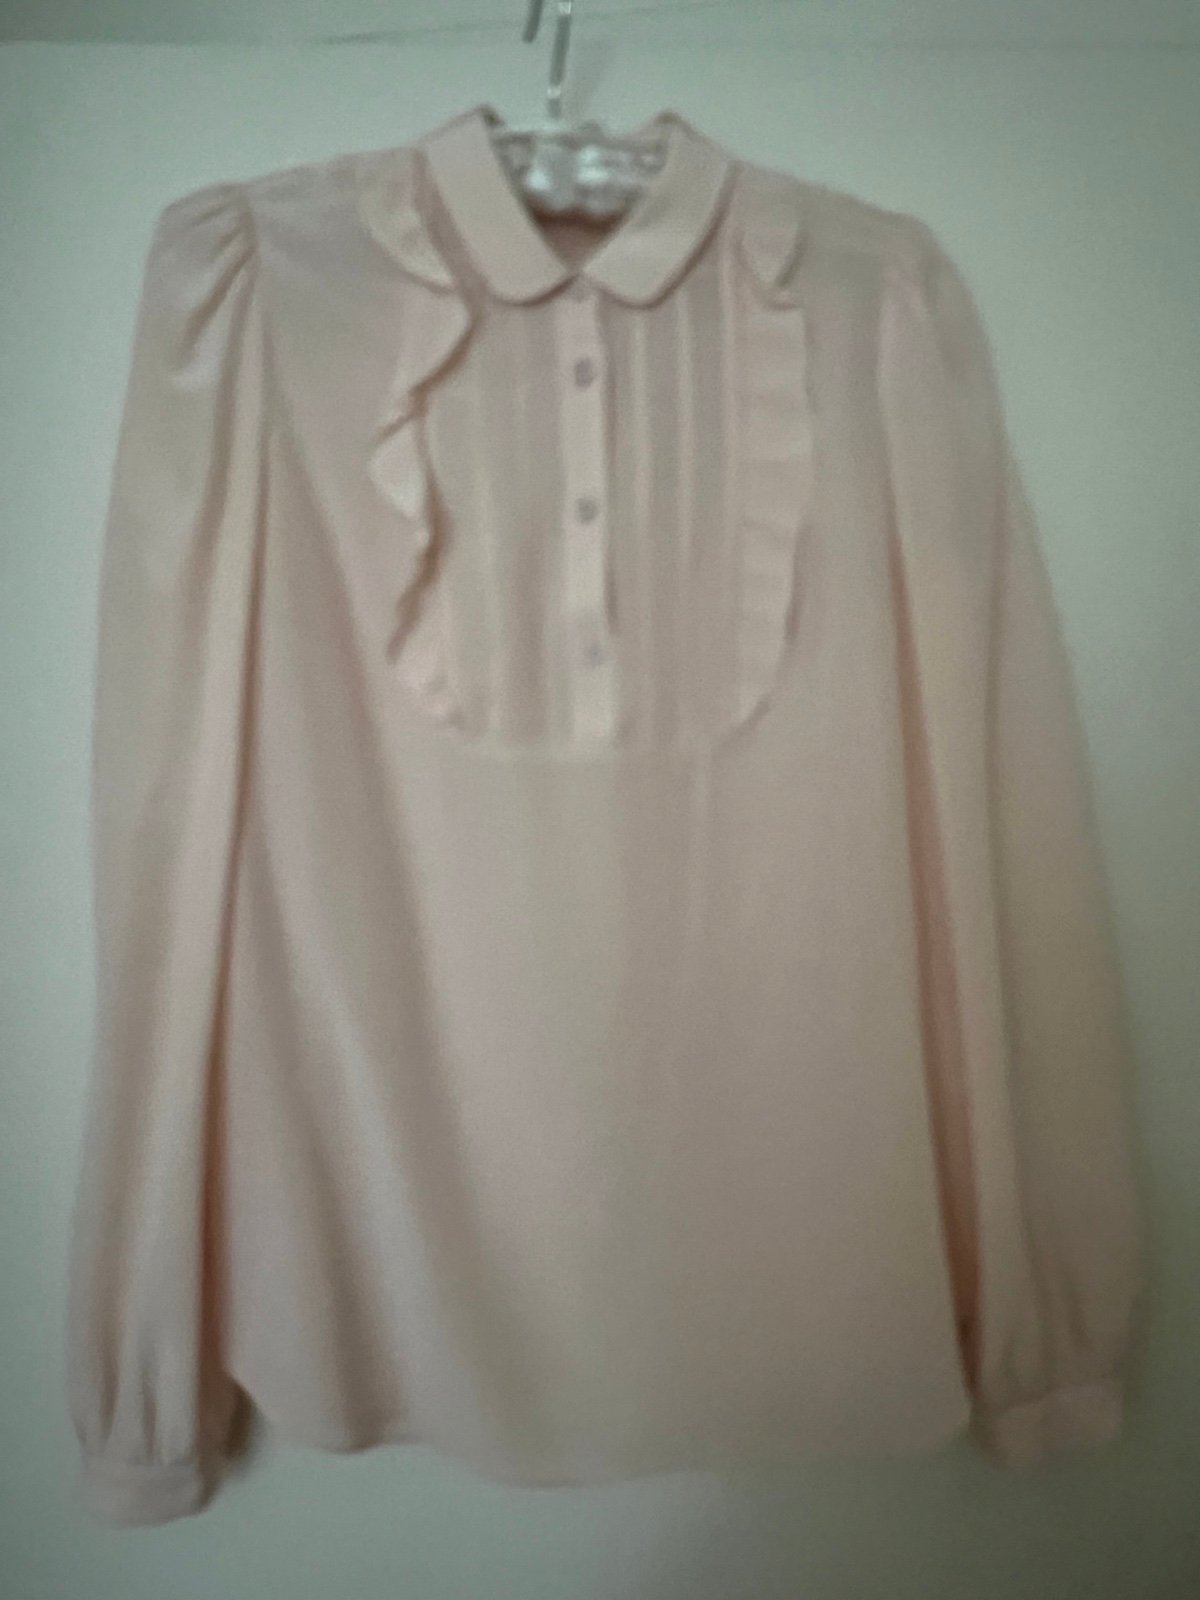 save up to 70% Kate Spade New York Silk Blouse O3drRa82P on sale